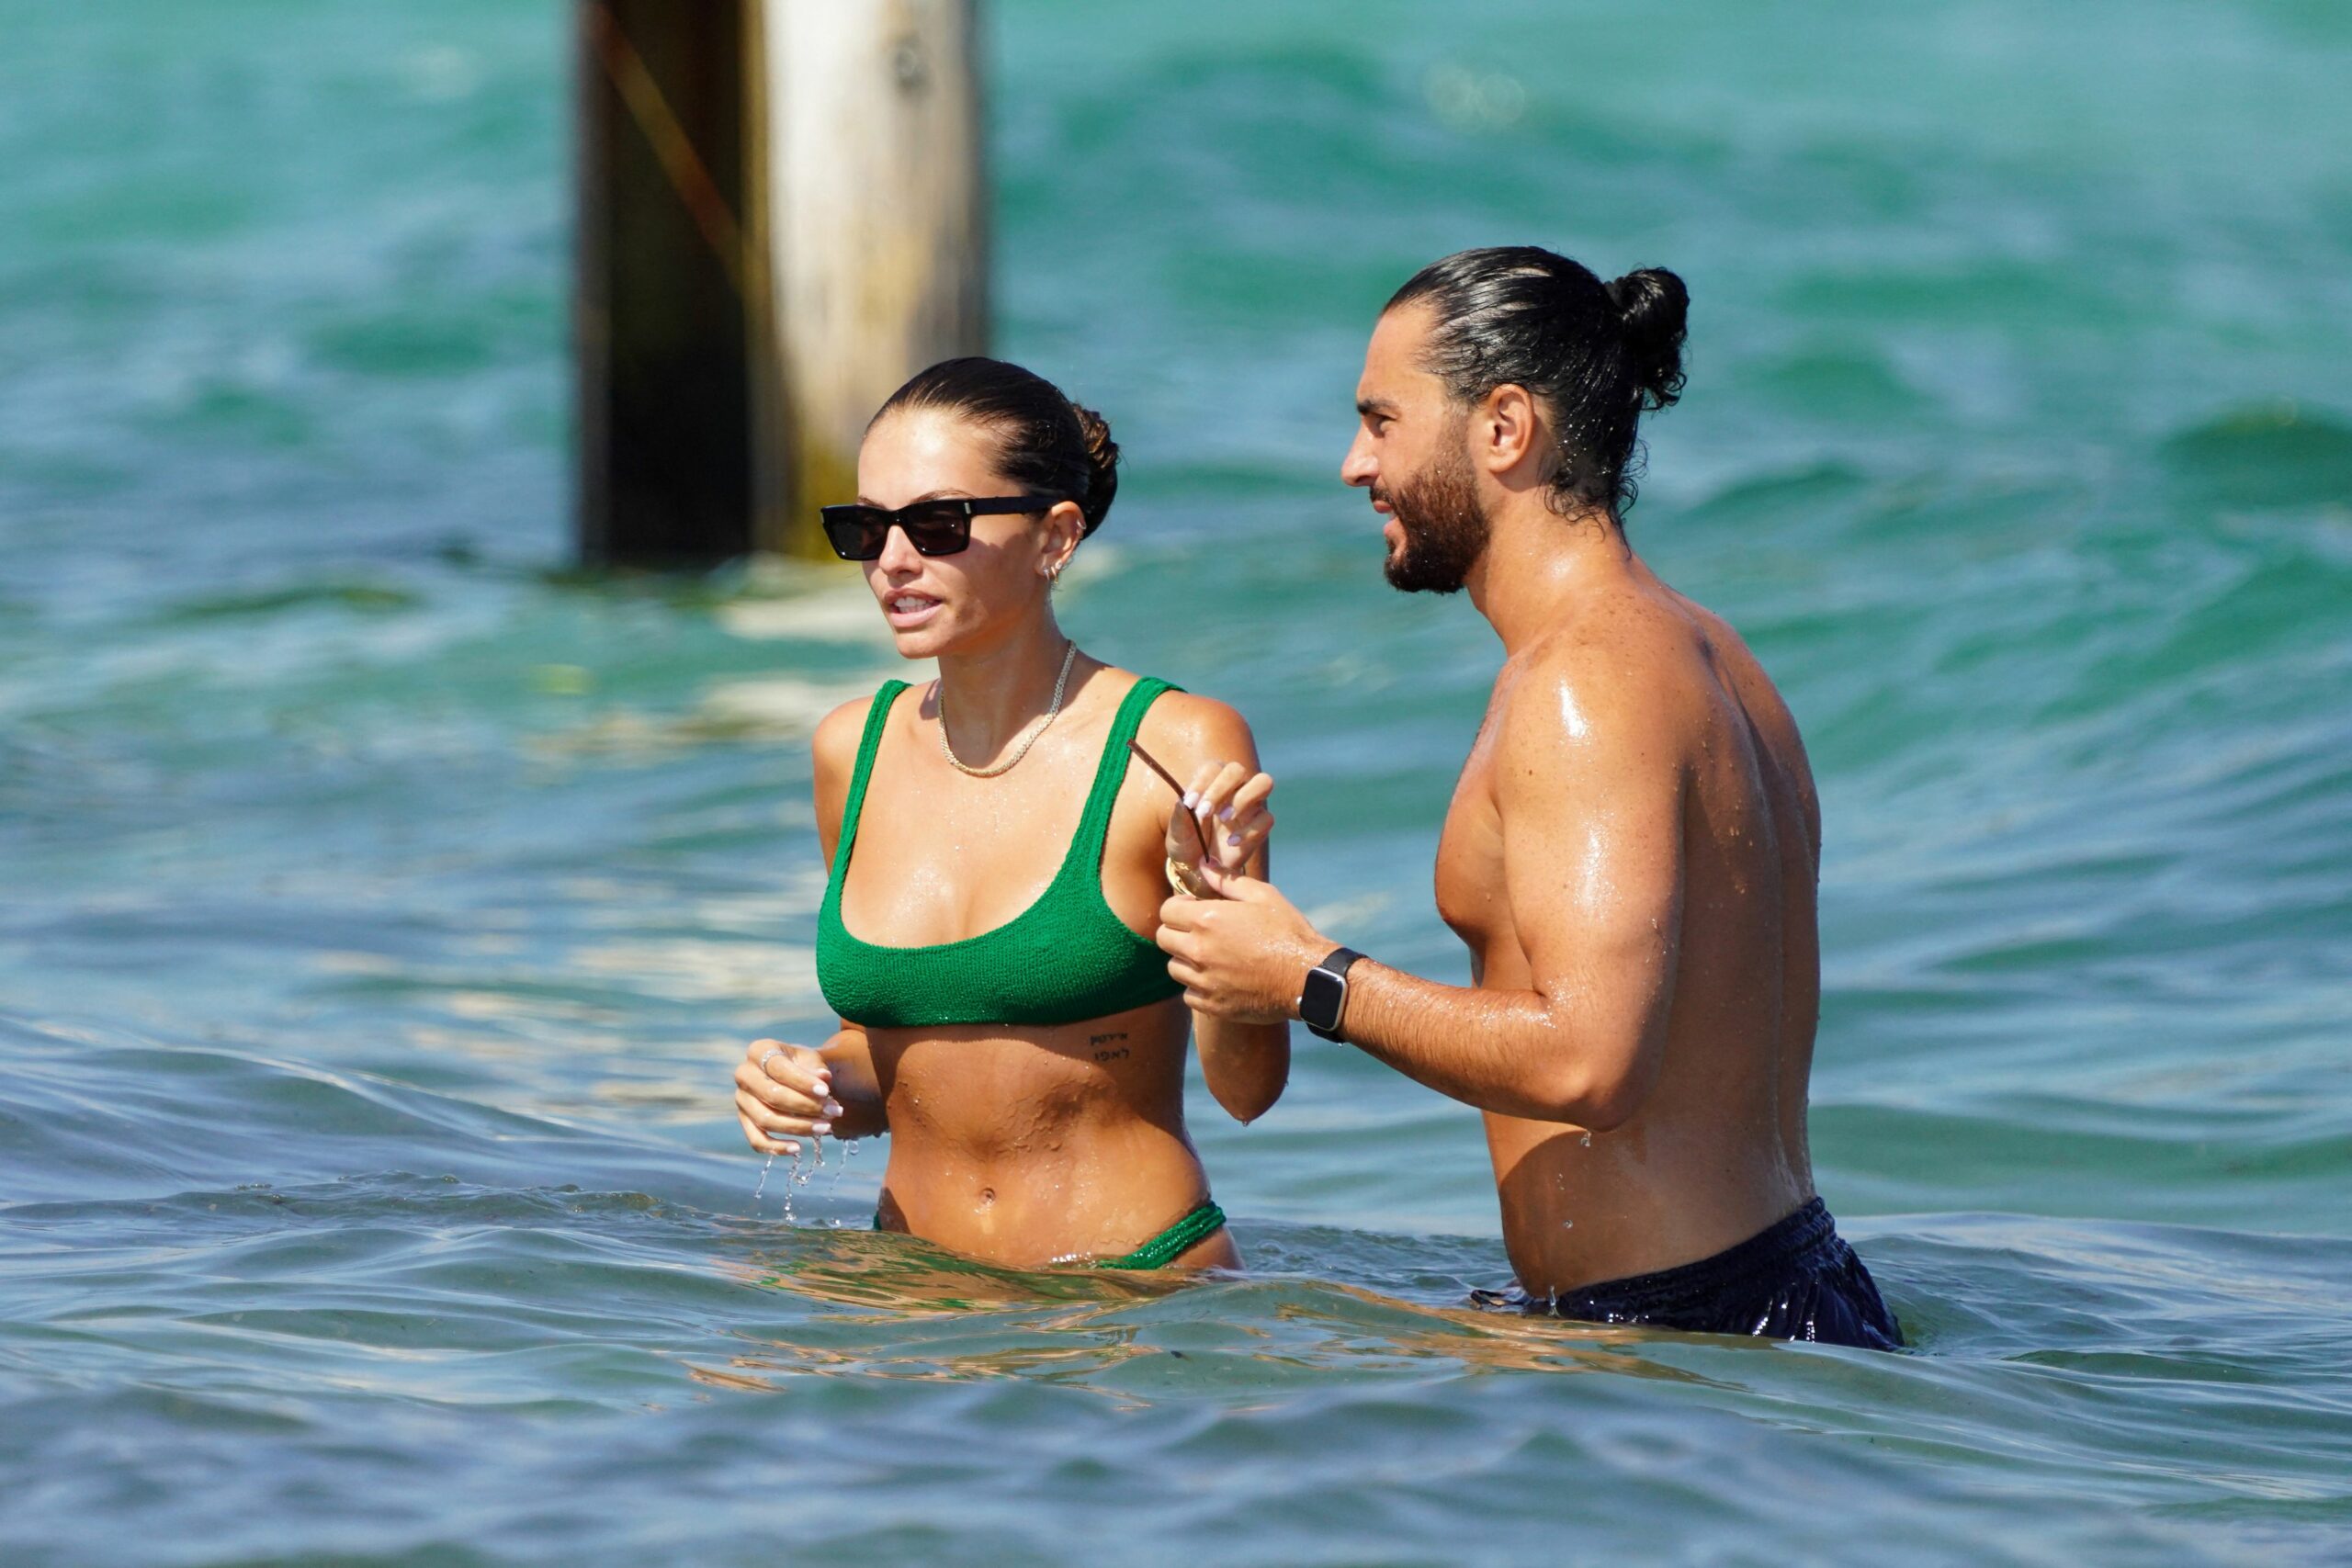 'Most beautiful girl in the world’ Thylane Blondeau showcases her stunning natural beauty in a green bikini as she soaked up the sun with her actor boyfriend Ben Attal in St Tropez, south of France on Tuesday August 16, 2022. NO CREDIT a3